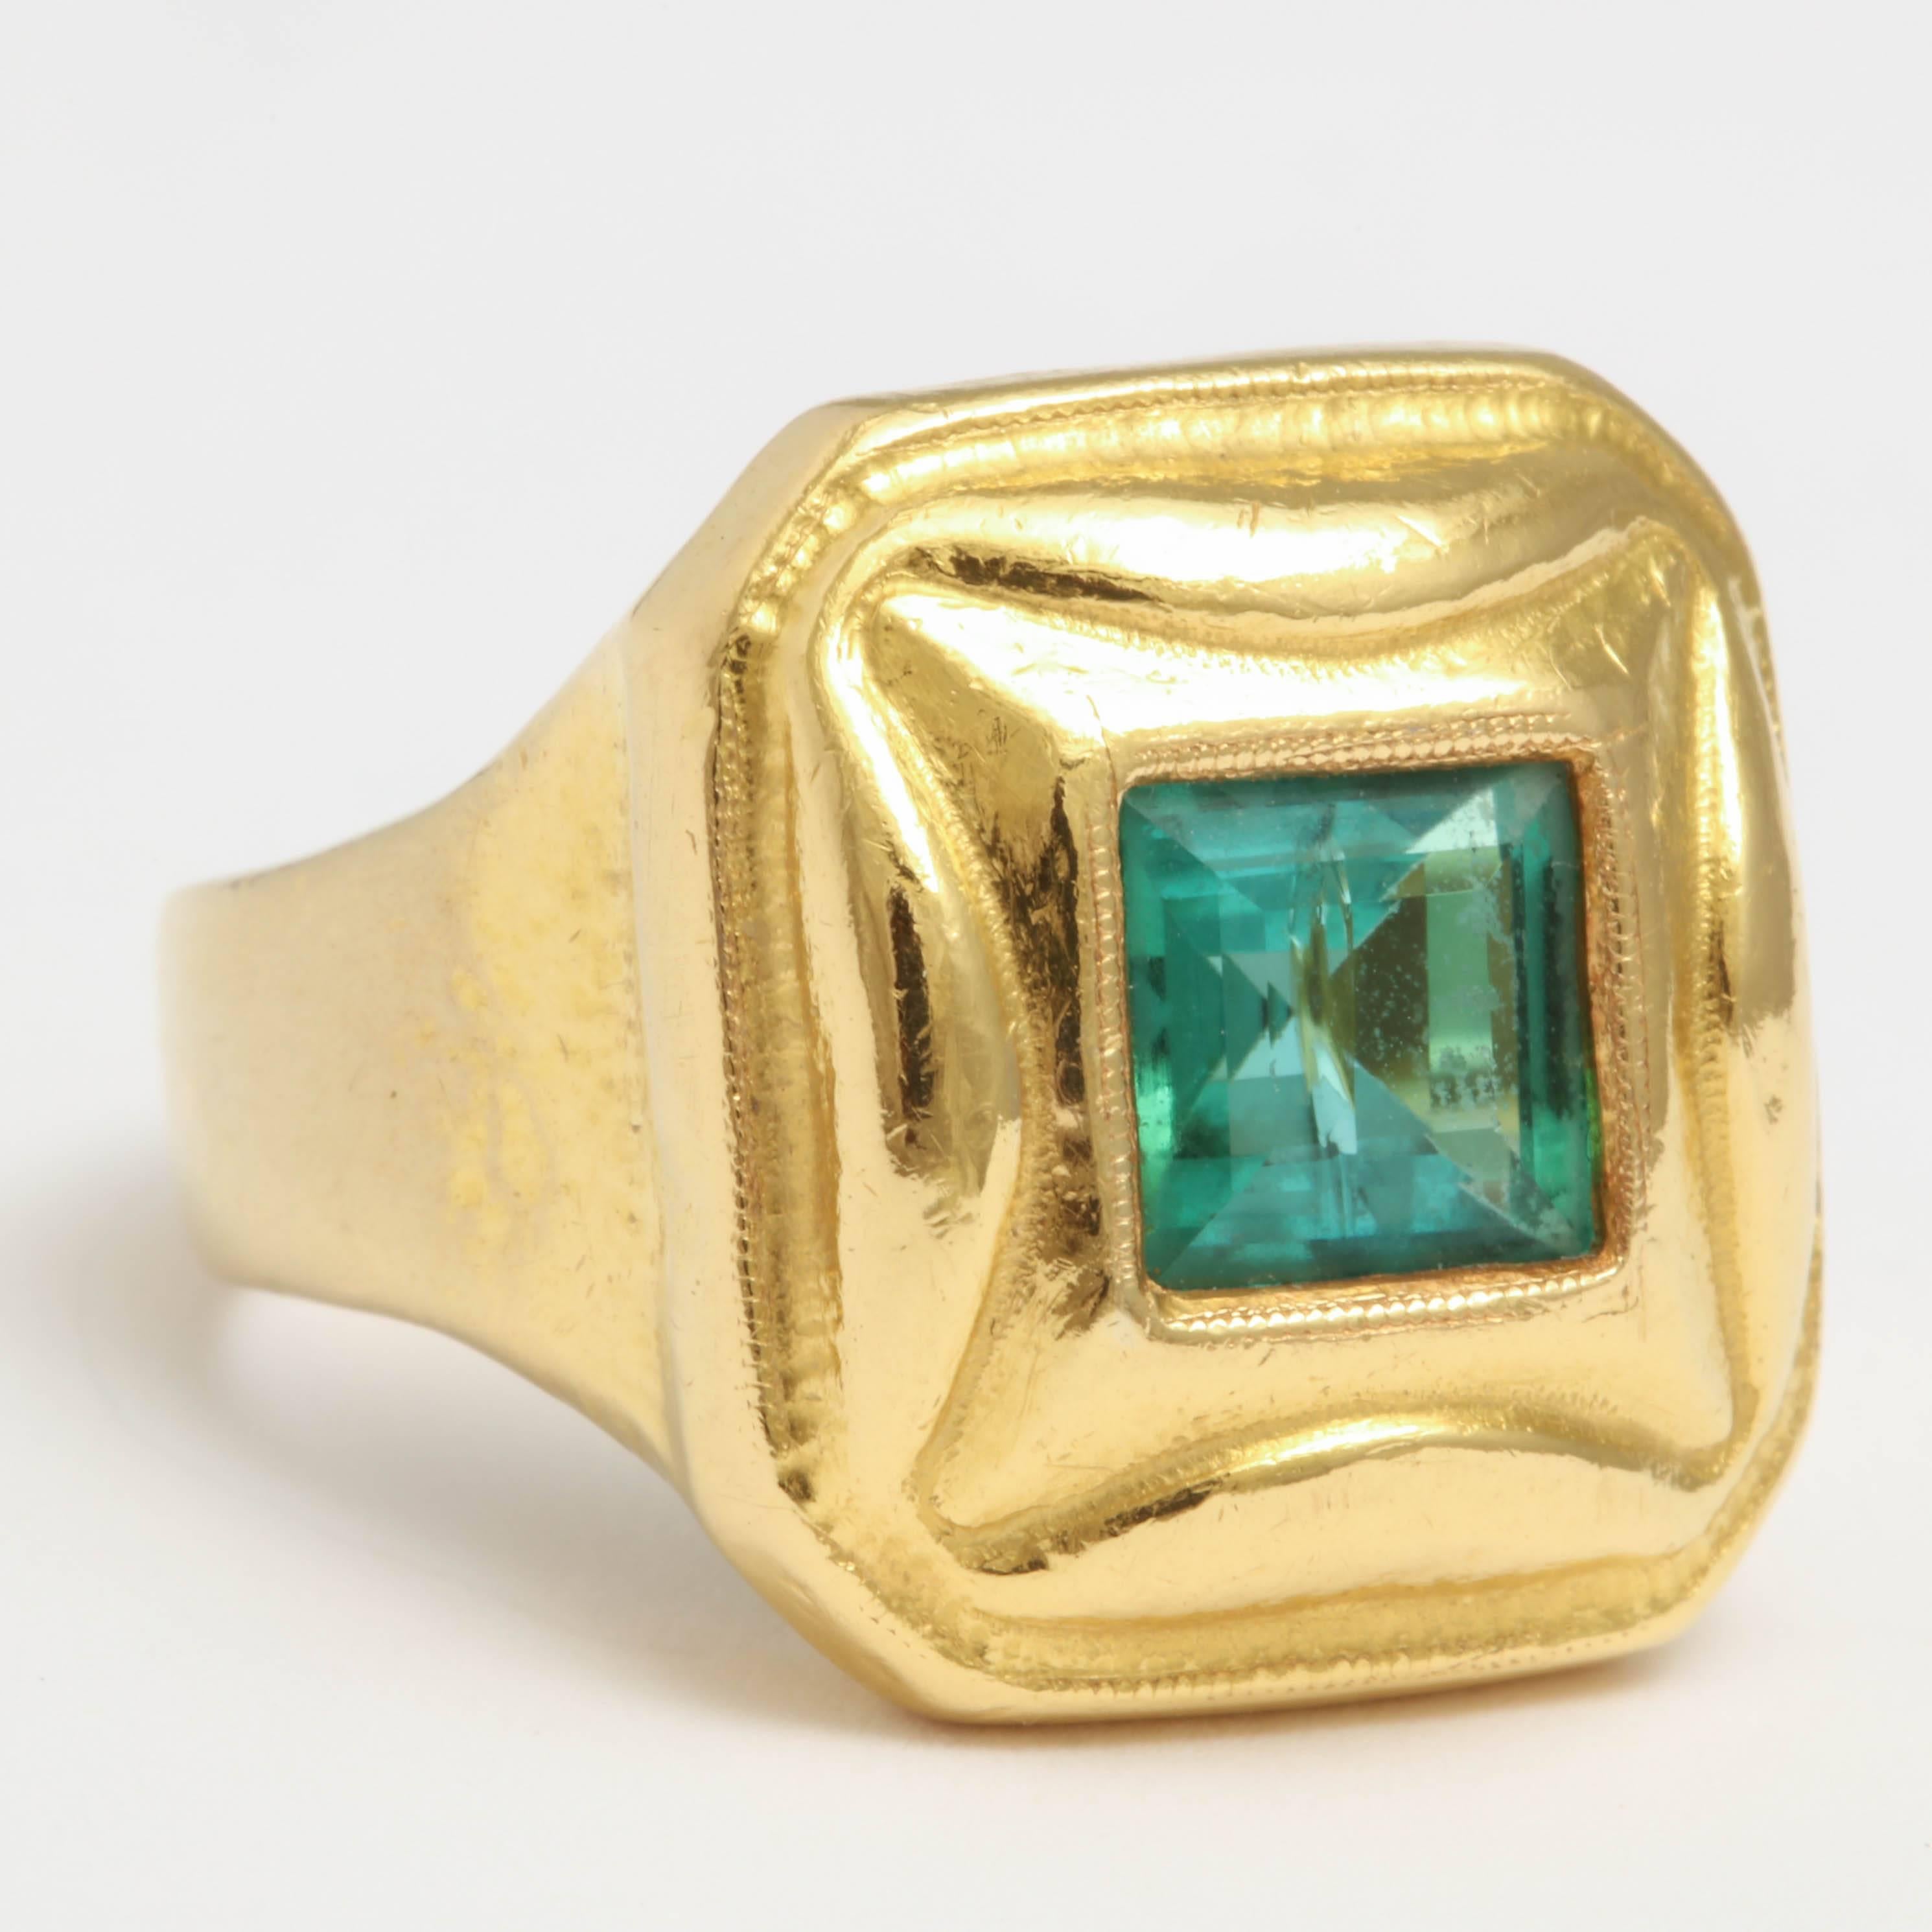 18kt Yellow Gold Ring Mounted with a square shaped Emerald in the Center.  Beautiful Clarity & color.  No certificate included.  It is now 6 1/4 but can be sized up or down. Signed with an un-identified Monogram and marked 750 indicating a European